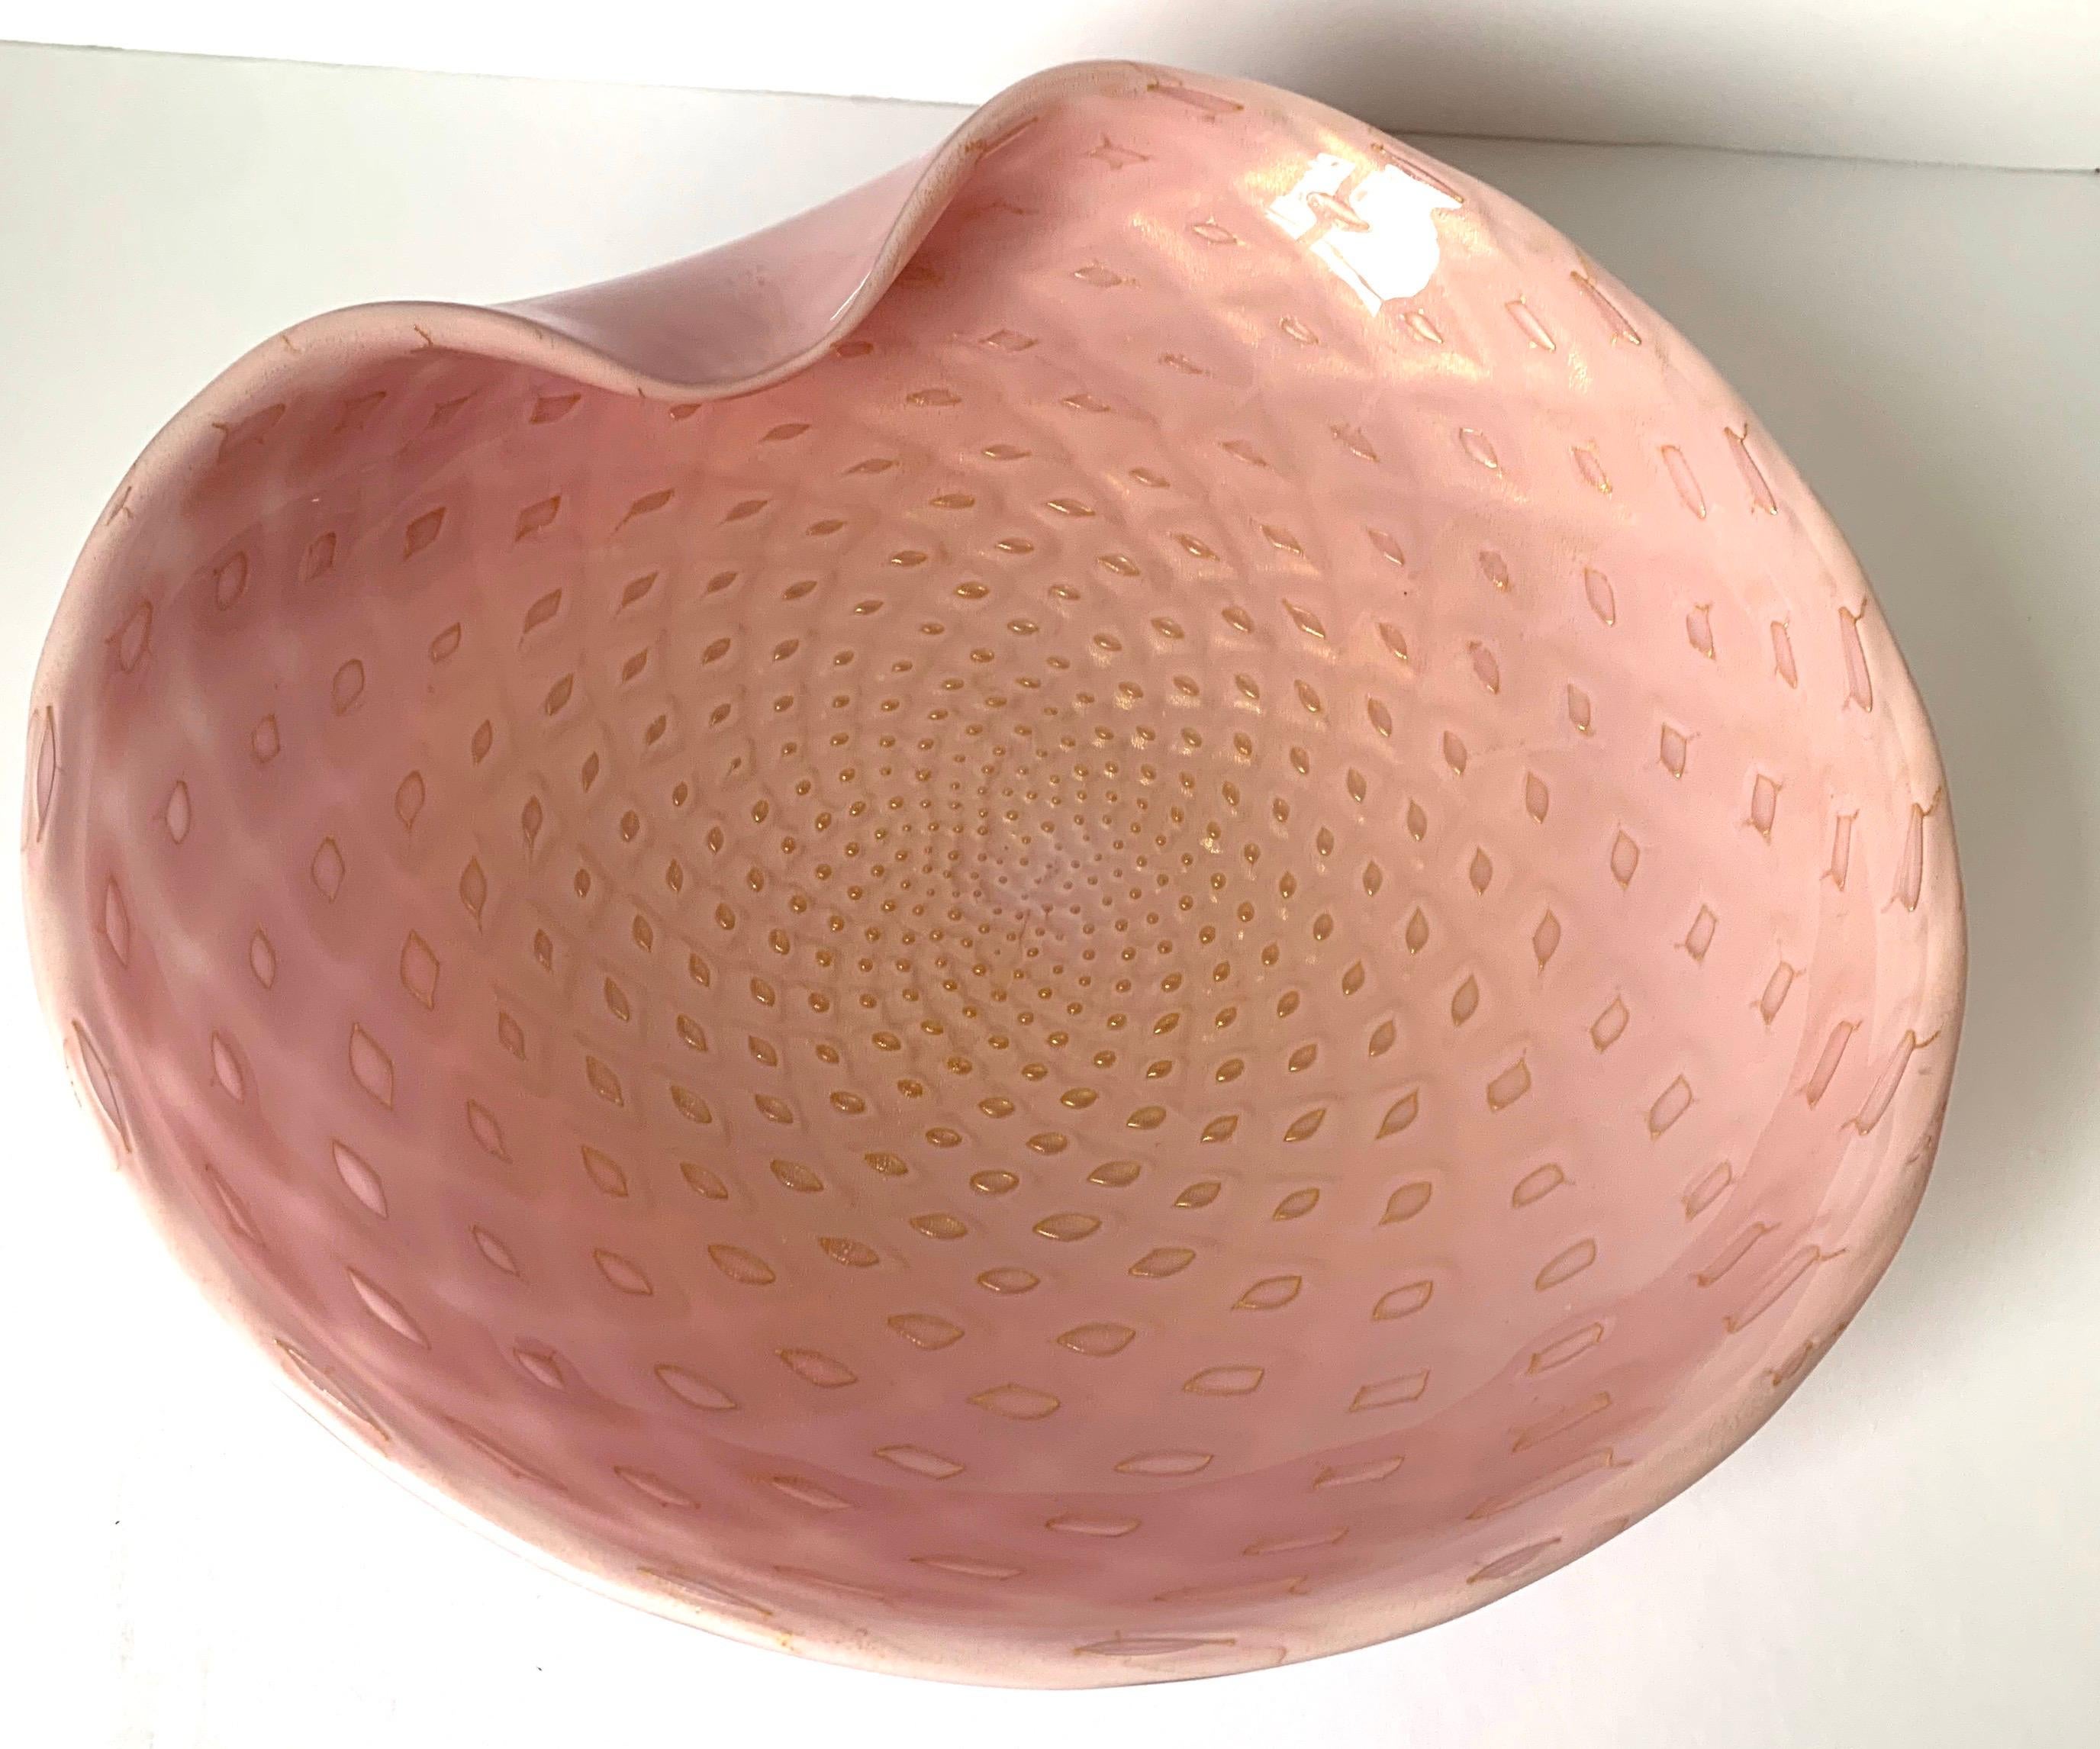 Large midcentury Murano glass ashtray by Barbini. Light pink with all-over bullicante (controlled bubbles) and gold flecks.